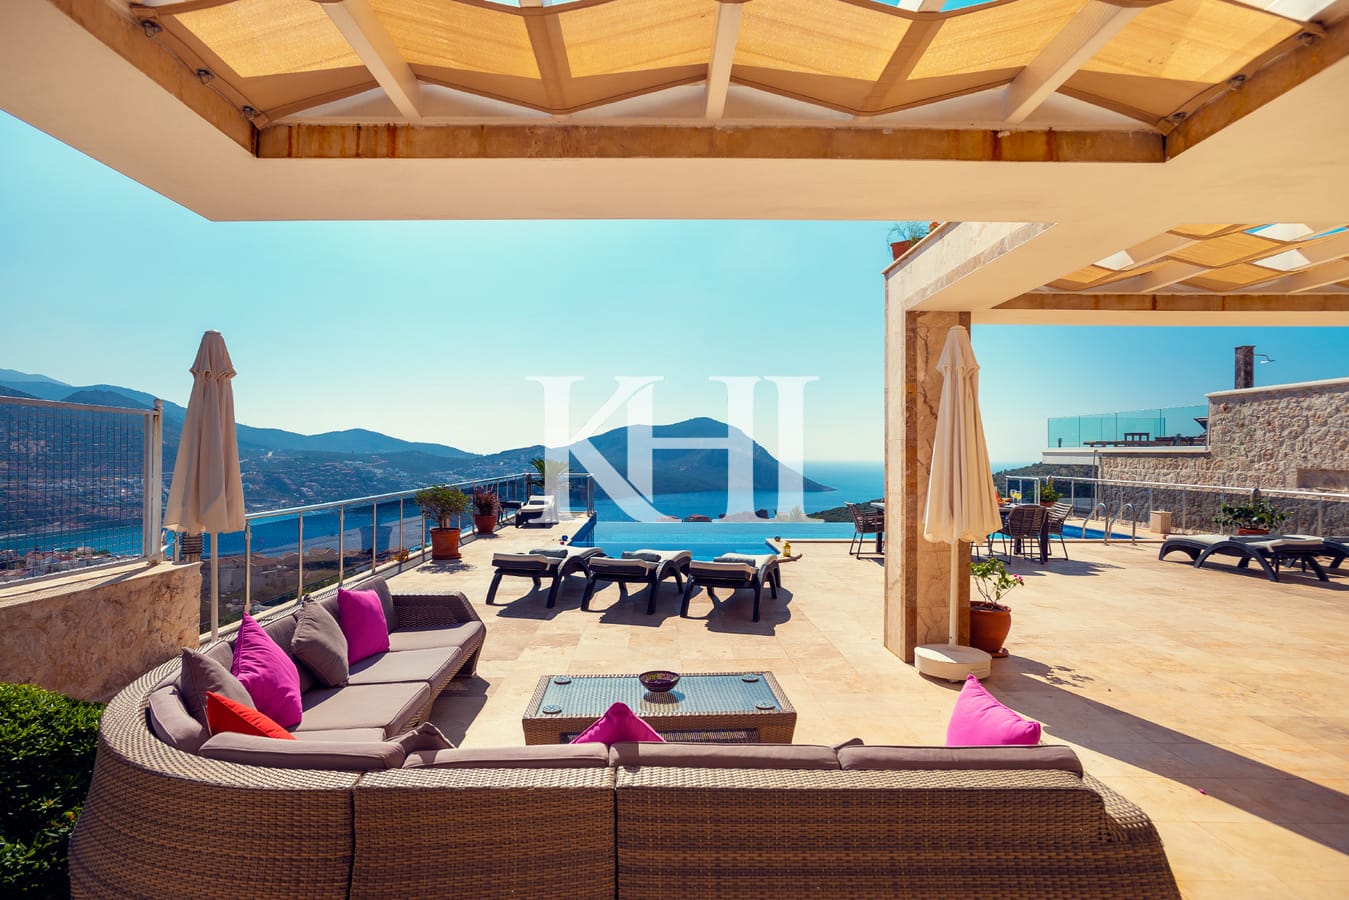 Detached Villa For Sale With Panoramic Kalkan View Slide Image 20